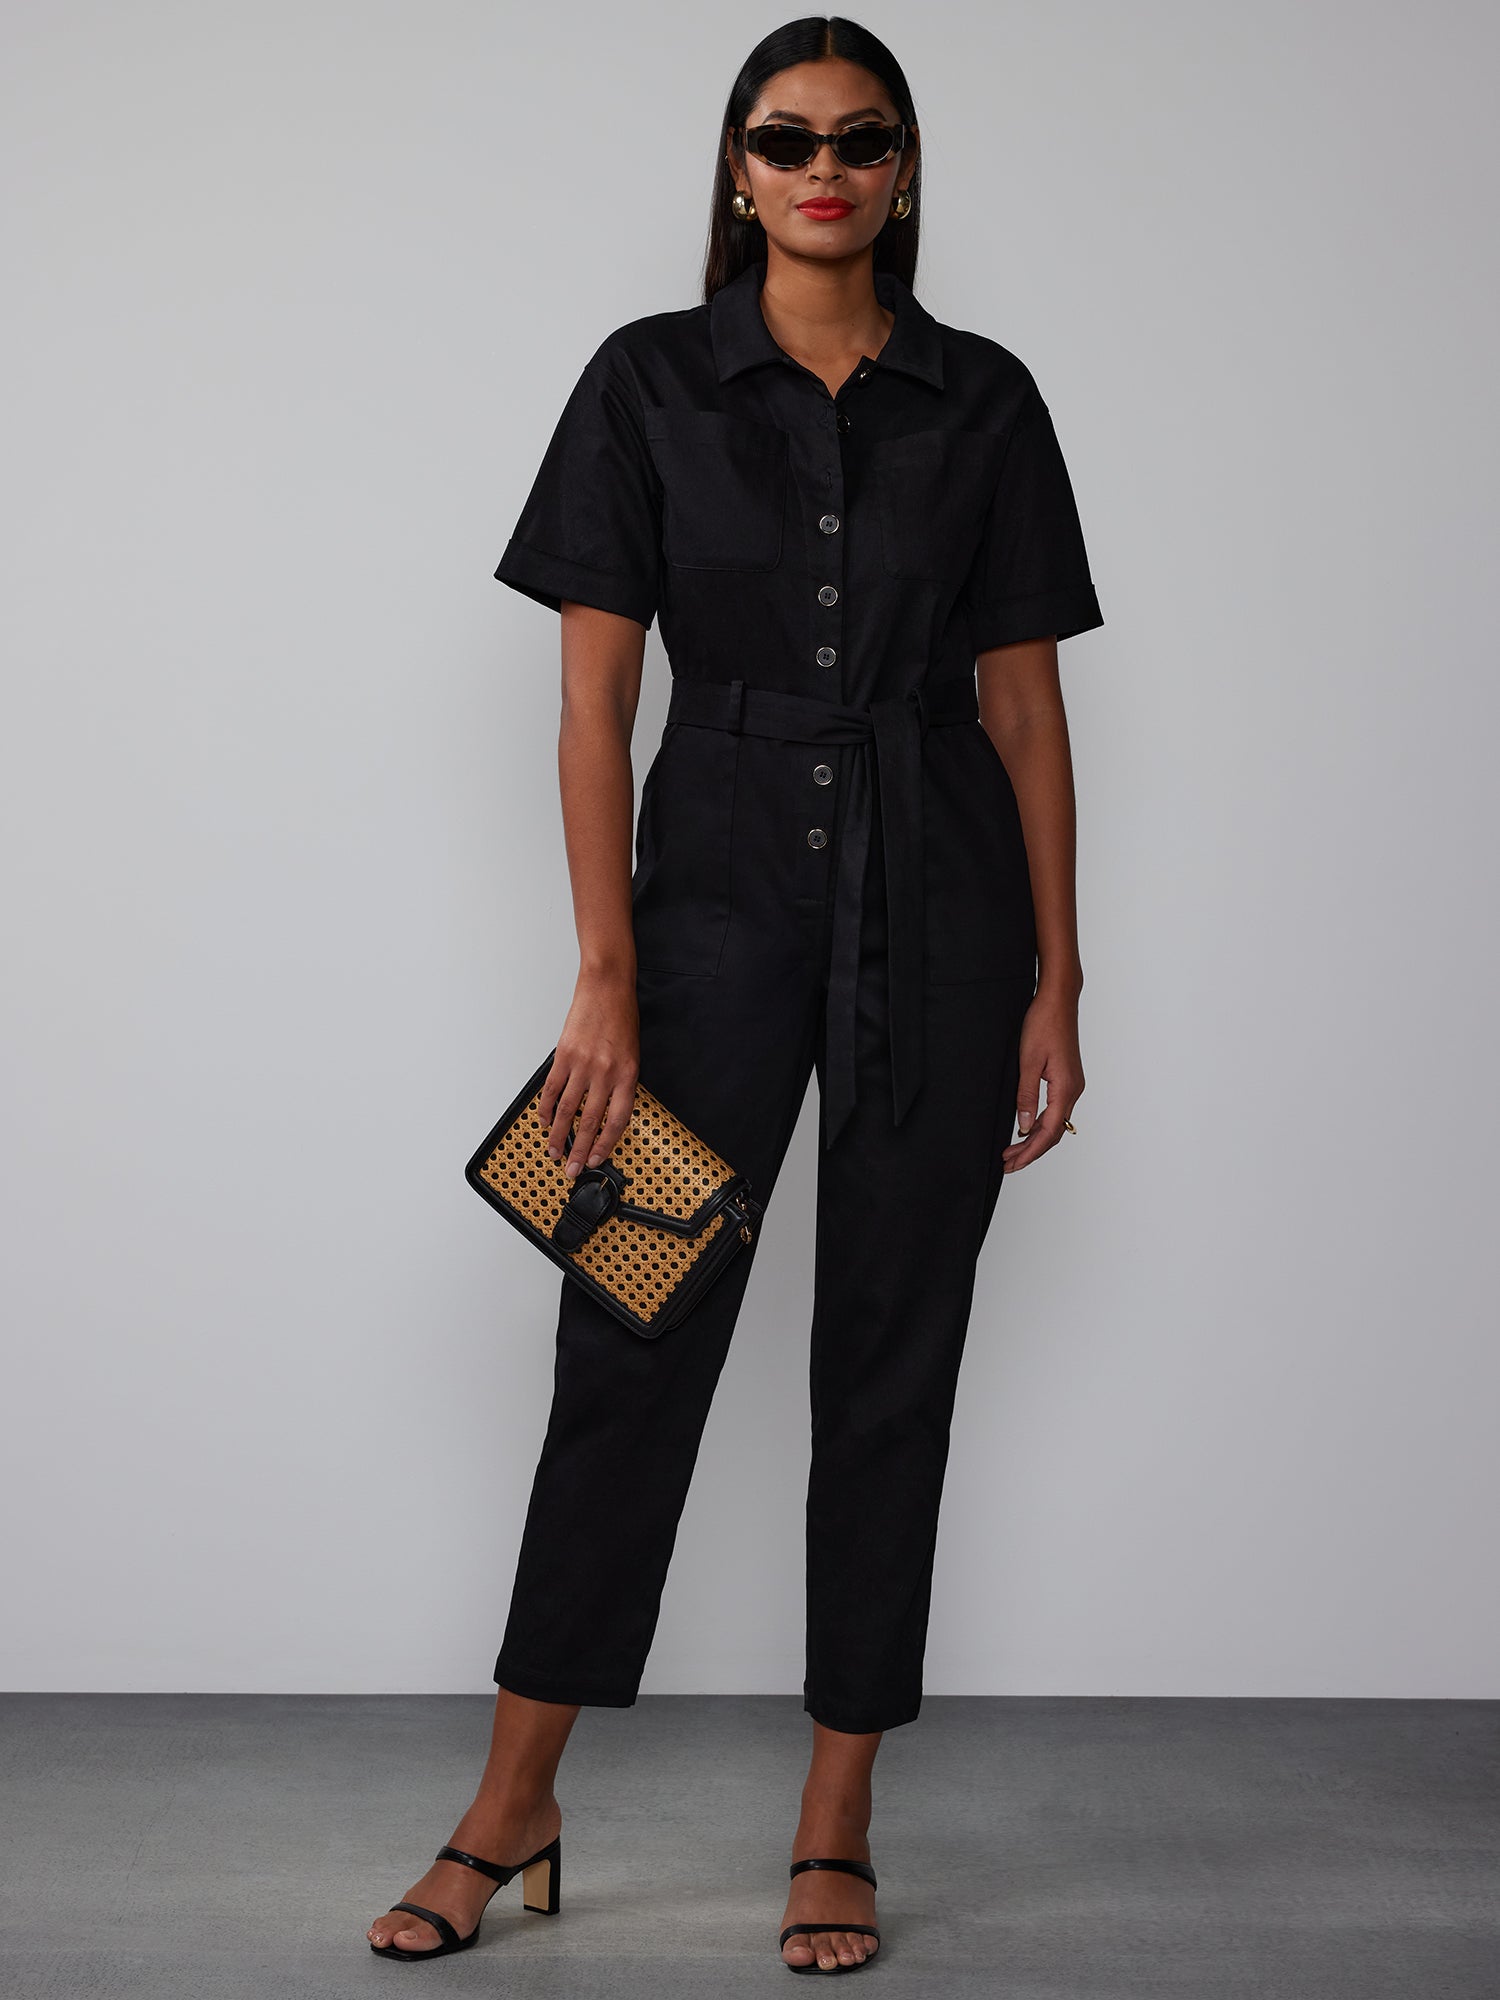 Pretty Lavish cut-out tailored jumpsuit in black | ASOS